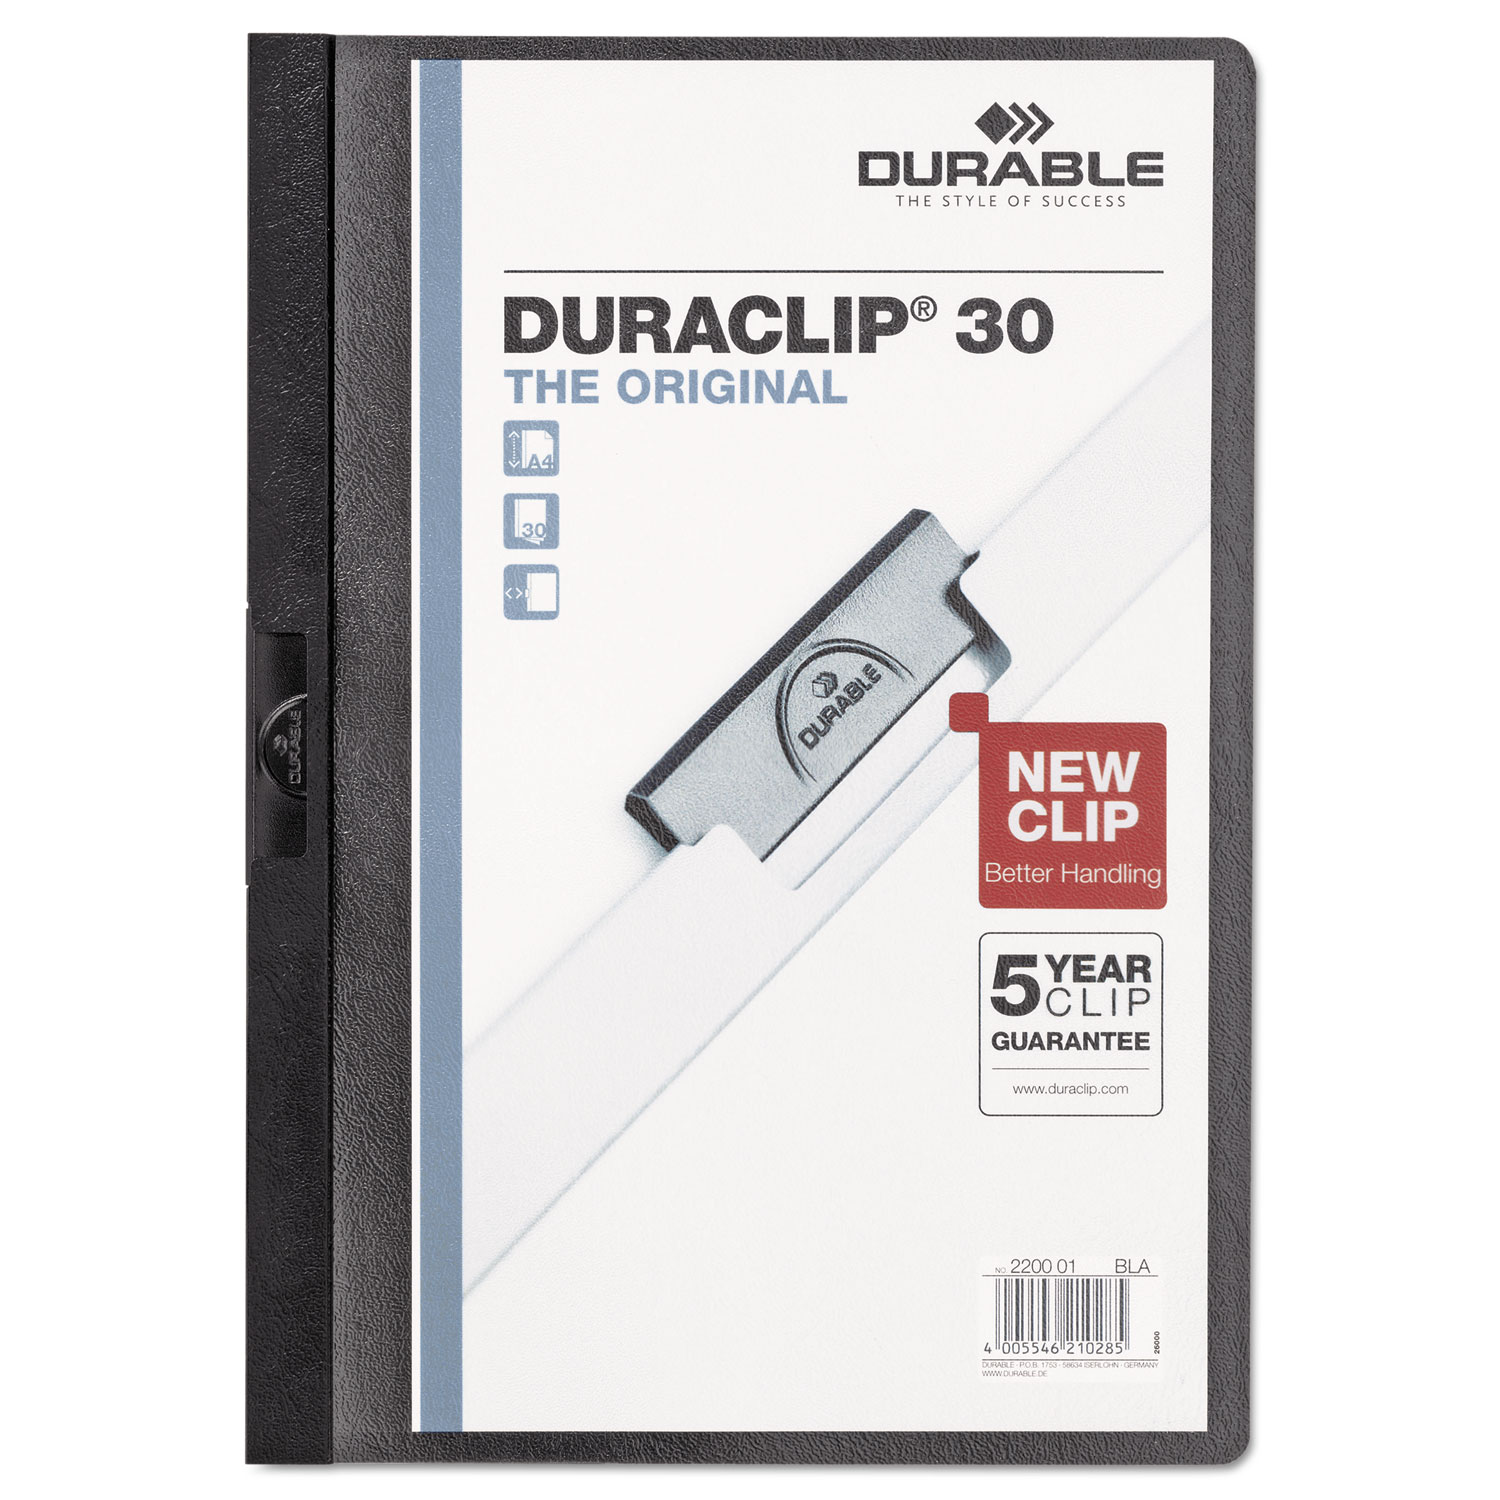 Durable DBL220301 Vinyl DuraClip Report Cover w/Clip, Letter, Holds 30 Pages, Clear/Black, 25/Box